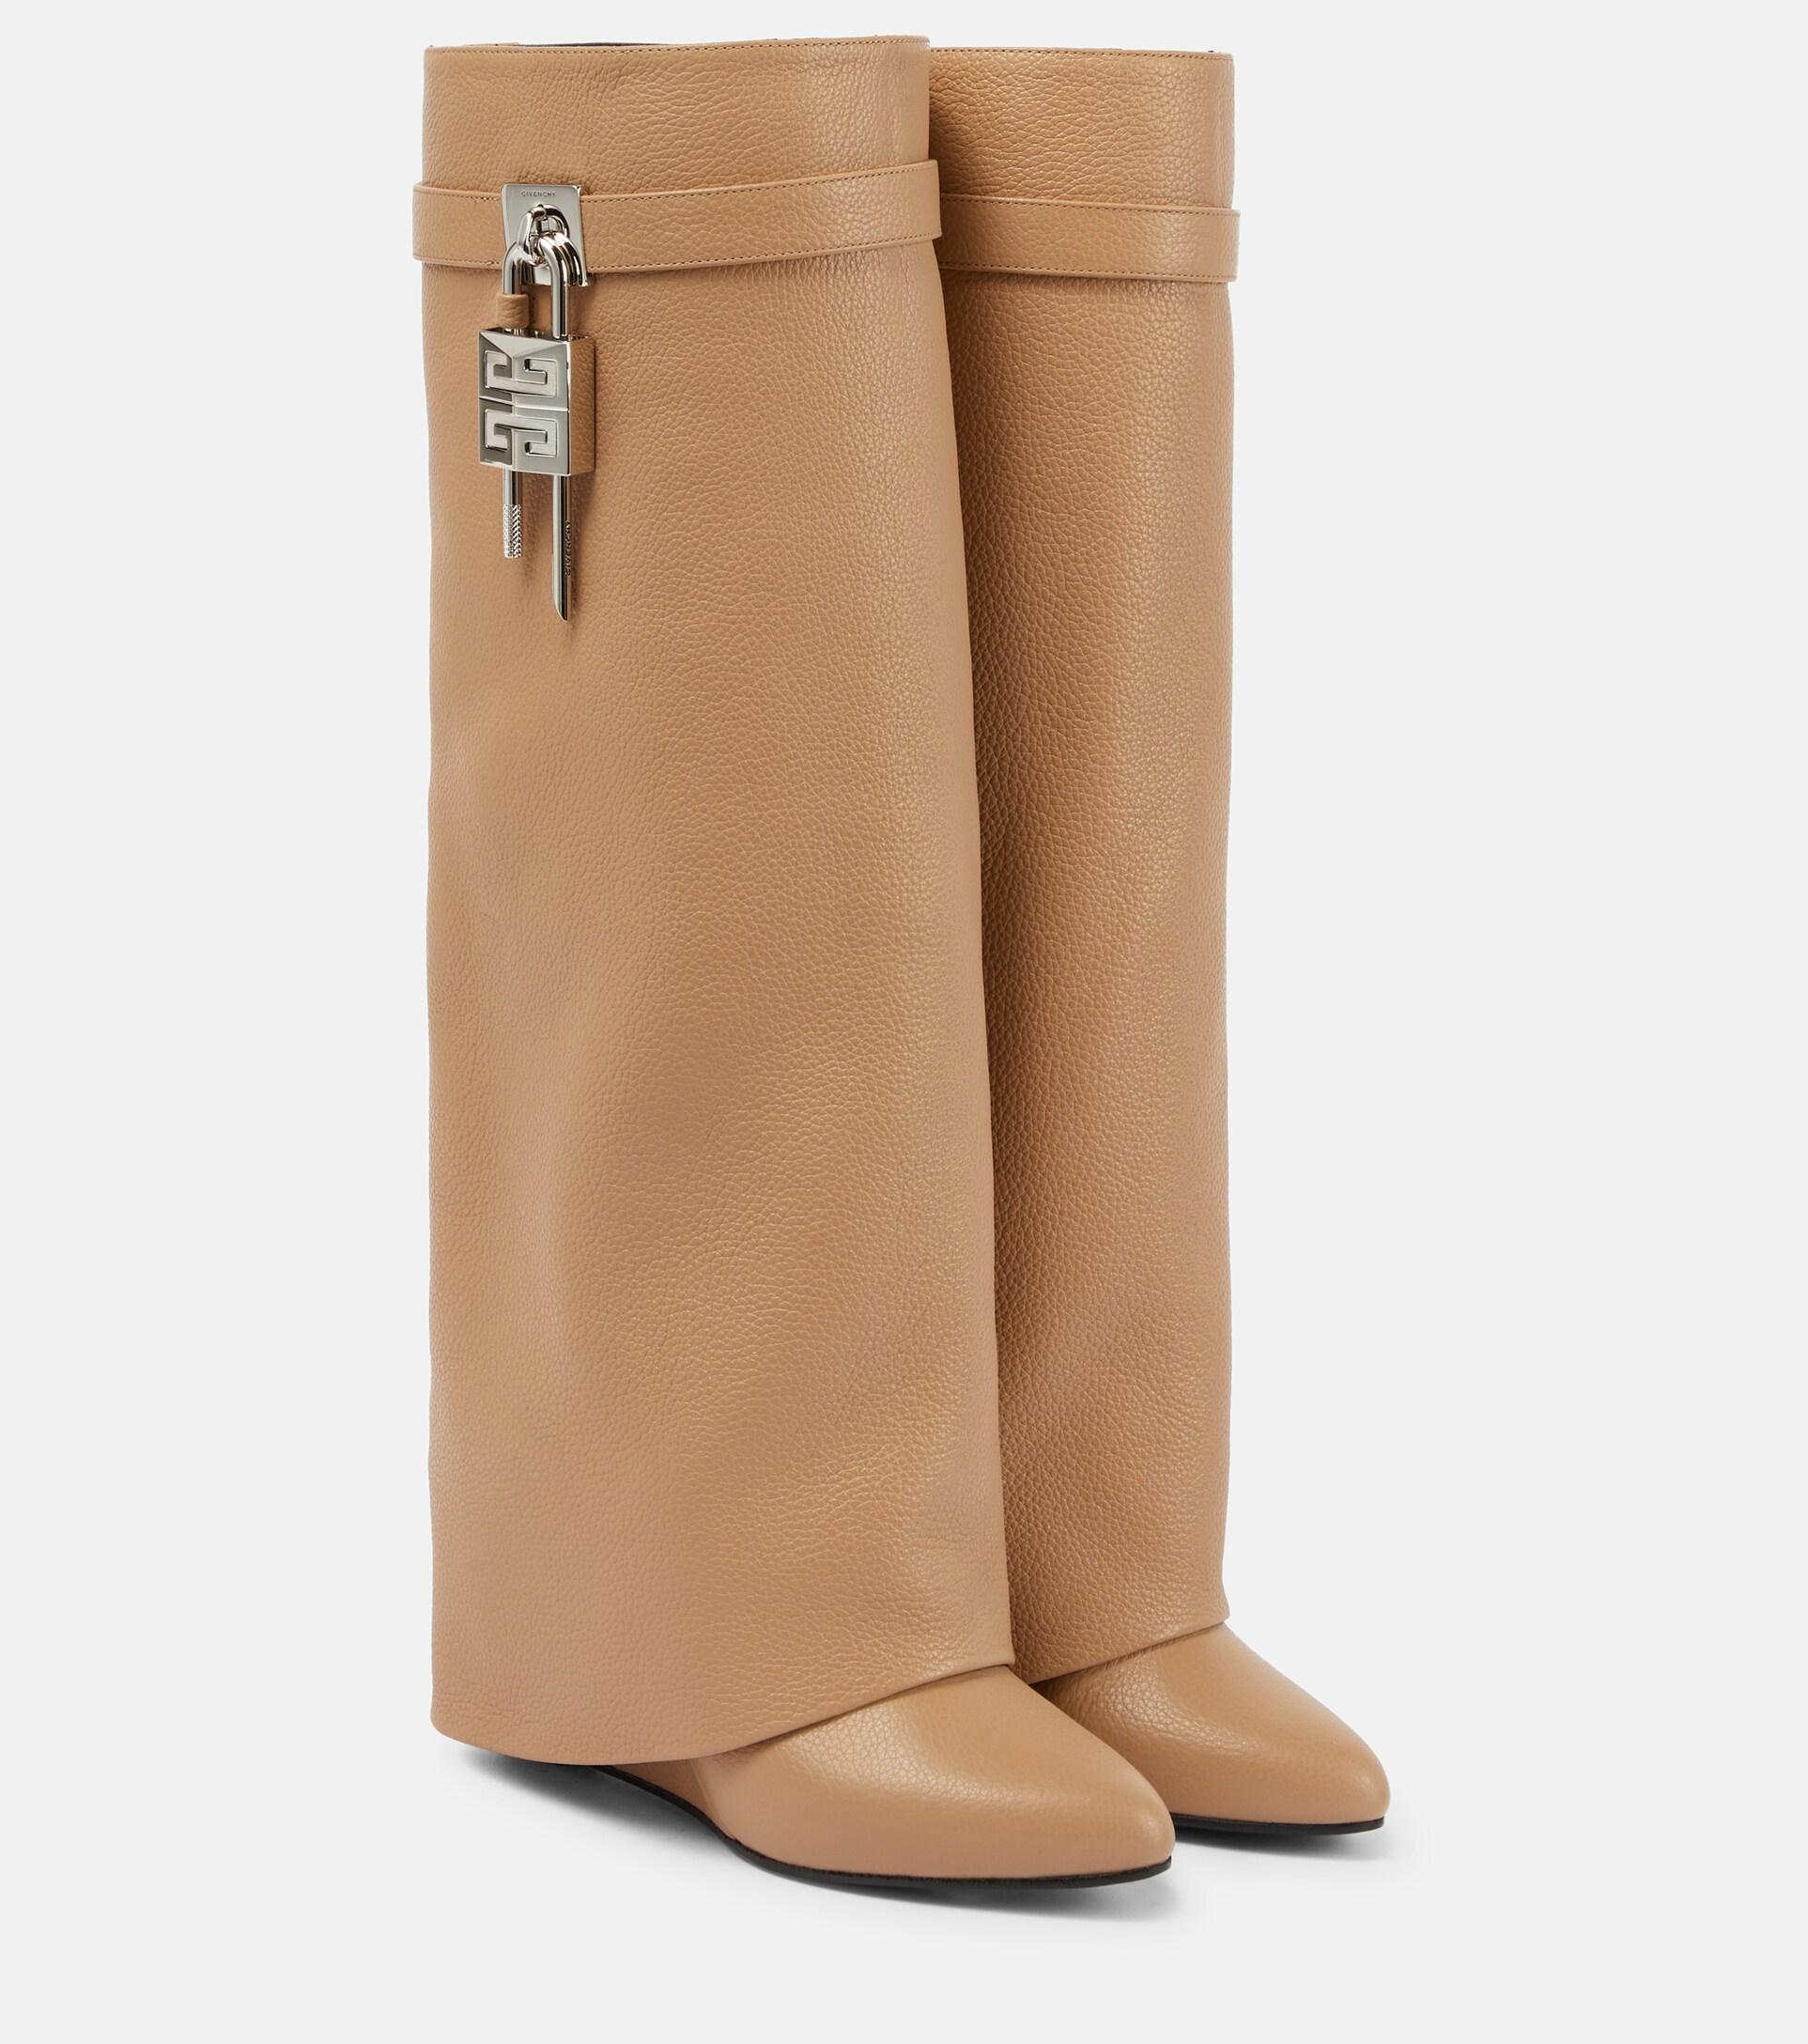 Givenchy Shark Lock Leather Knee-high Boots in Brown | Lyst